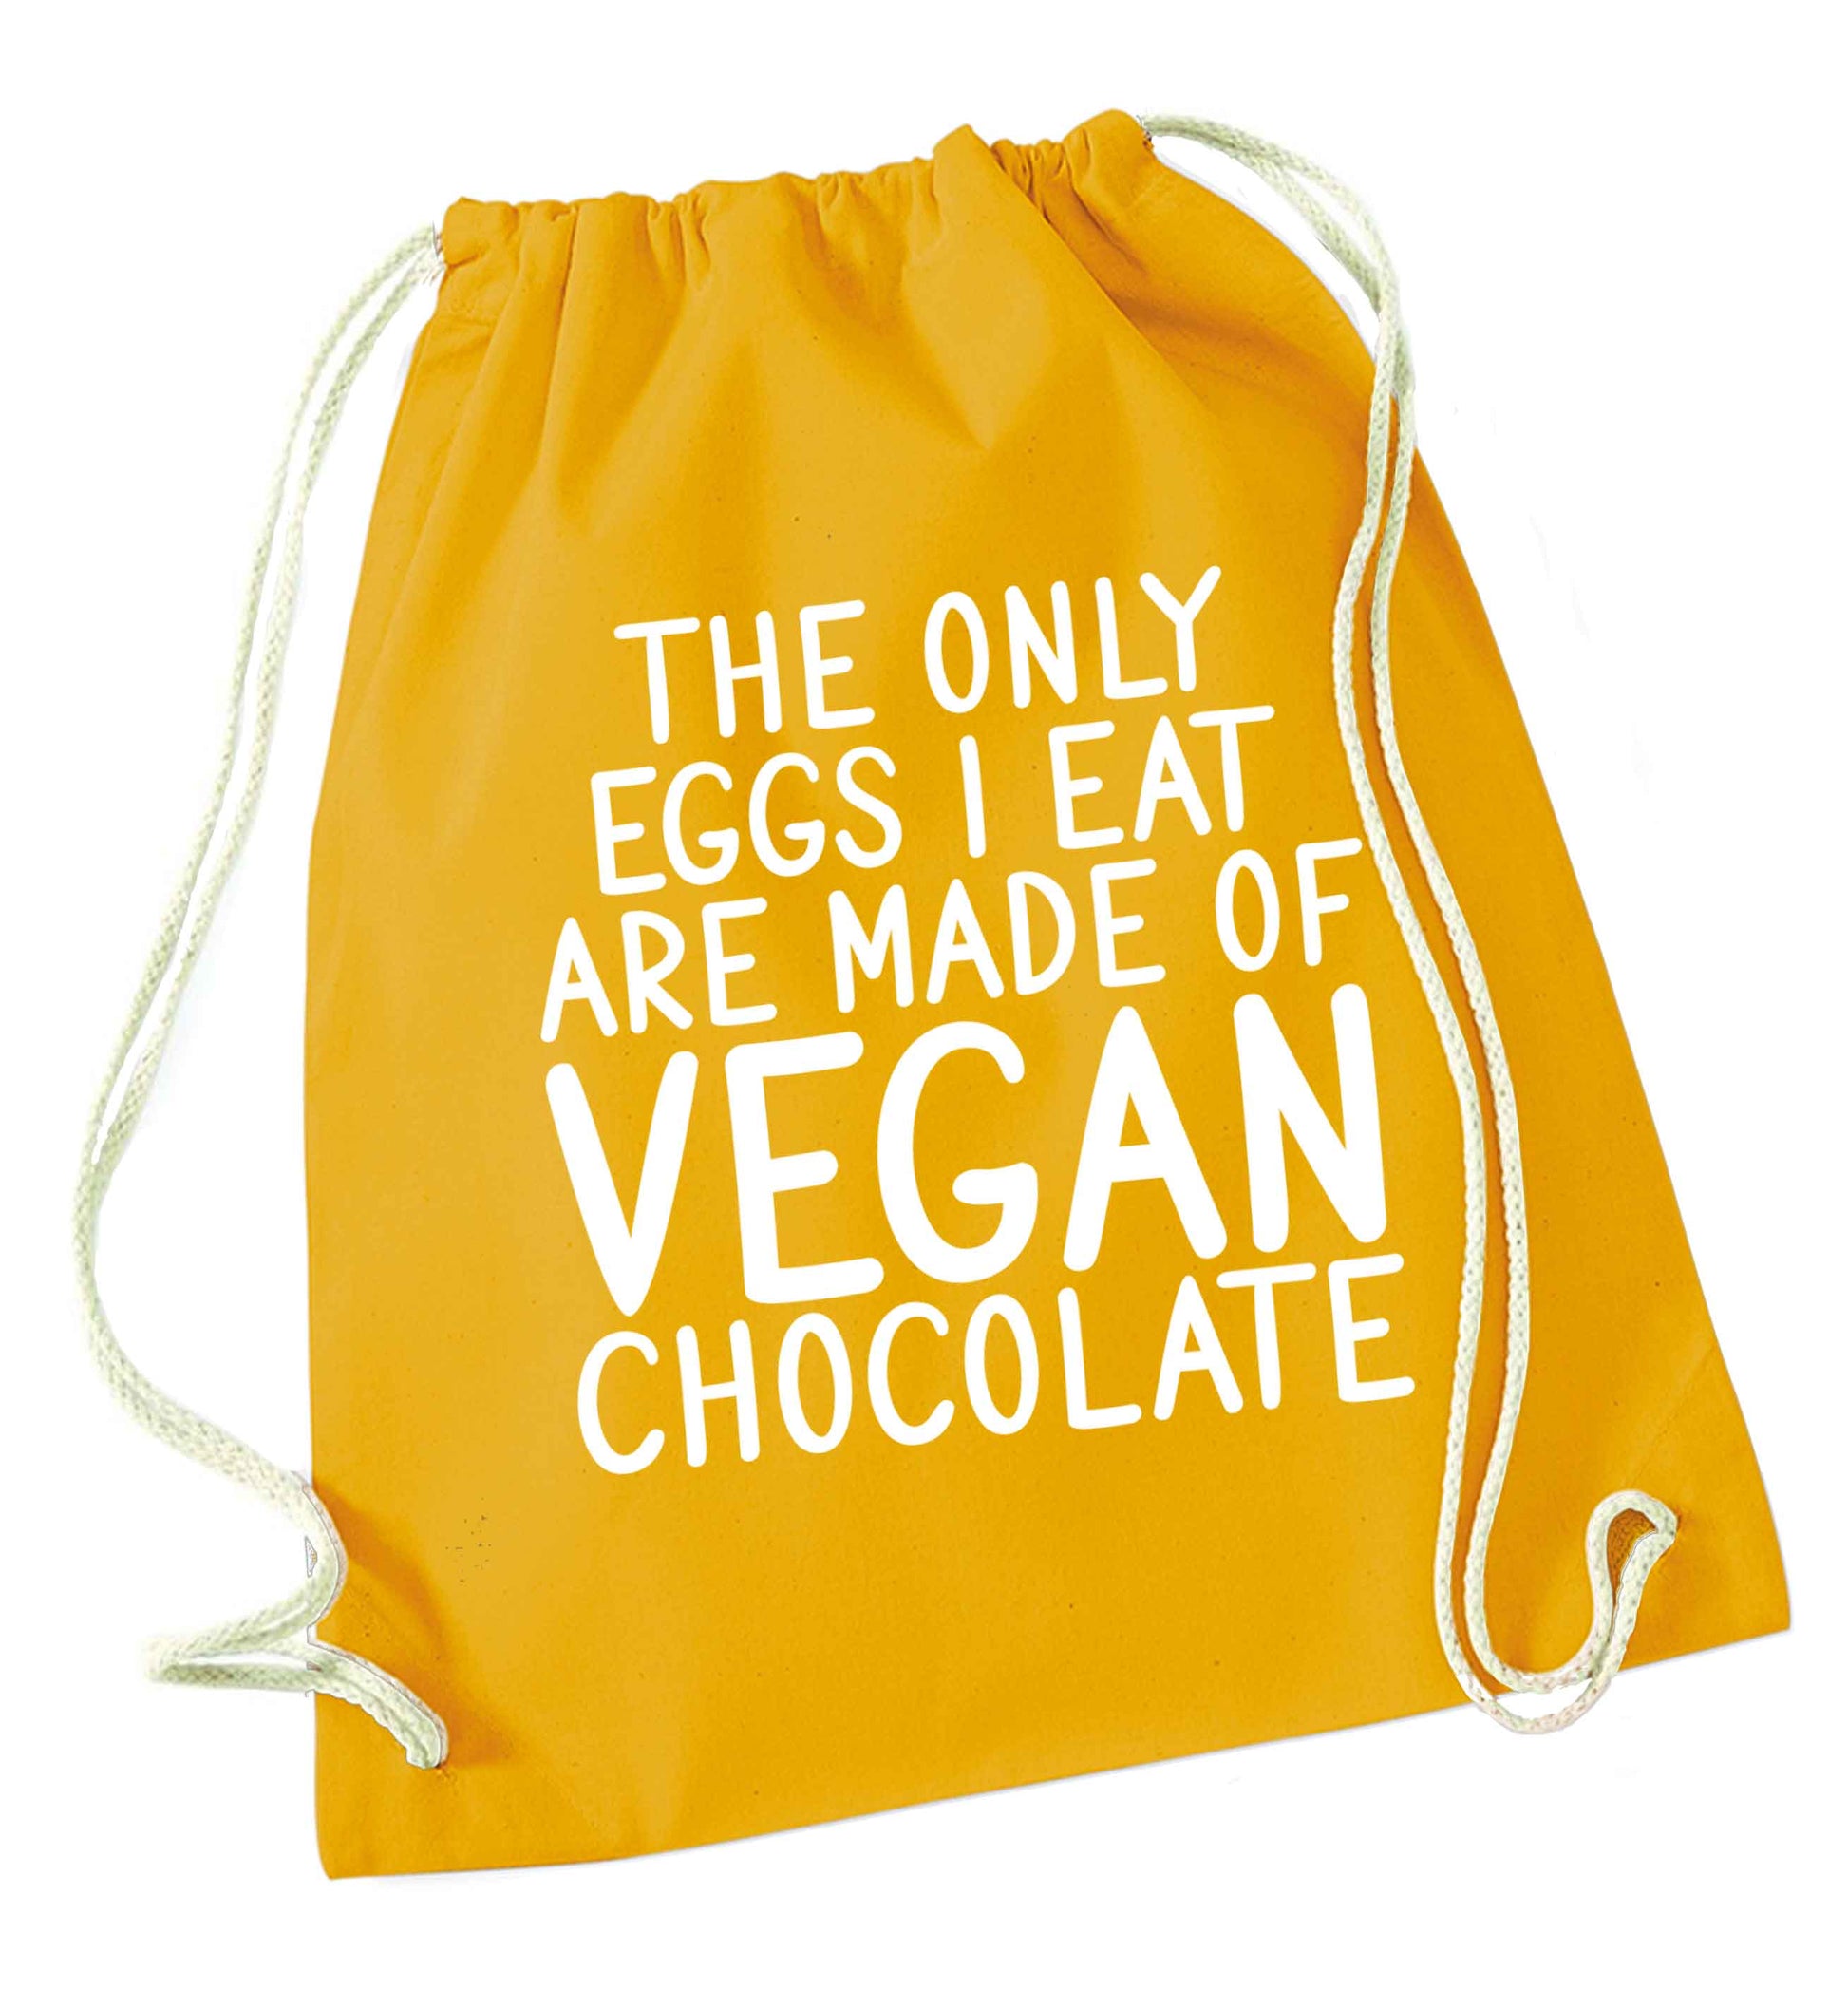 The only eggs I eat are made of vegan chocolate mustard drawstring bag